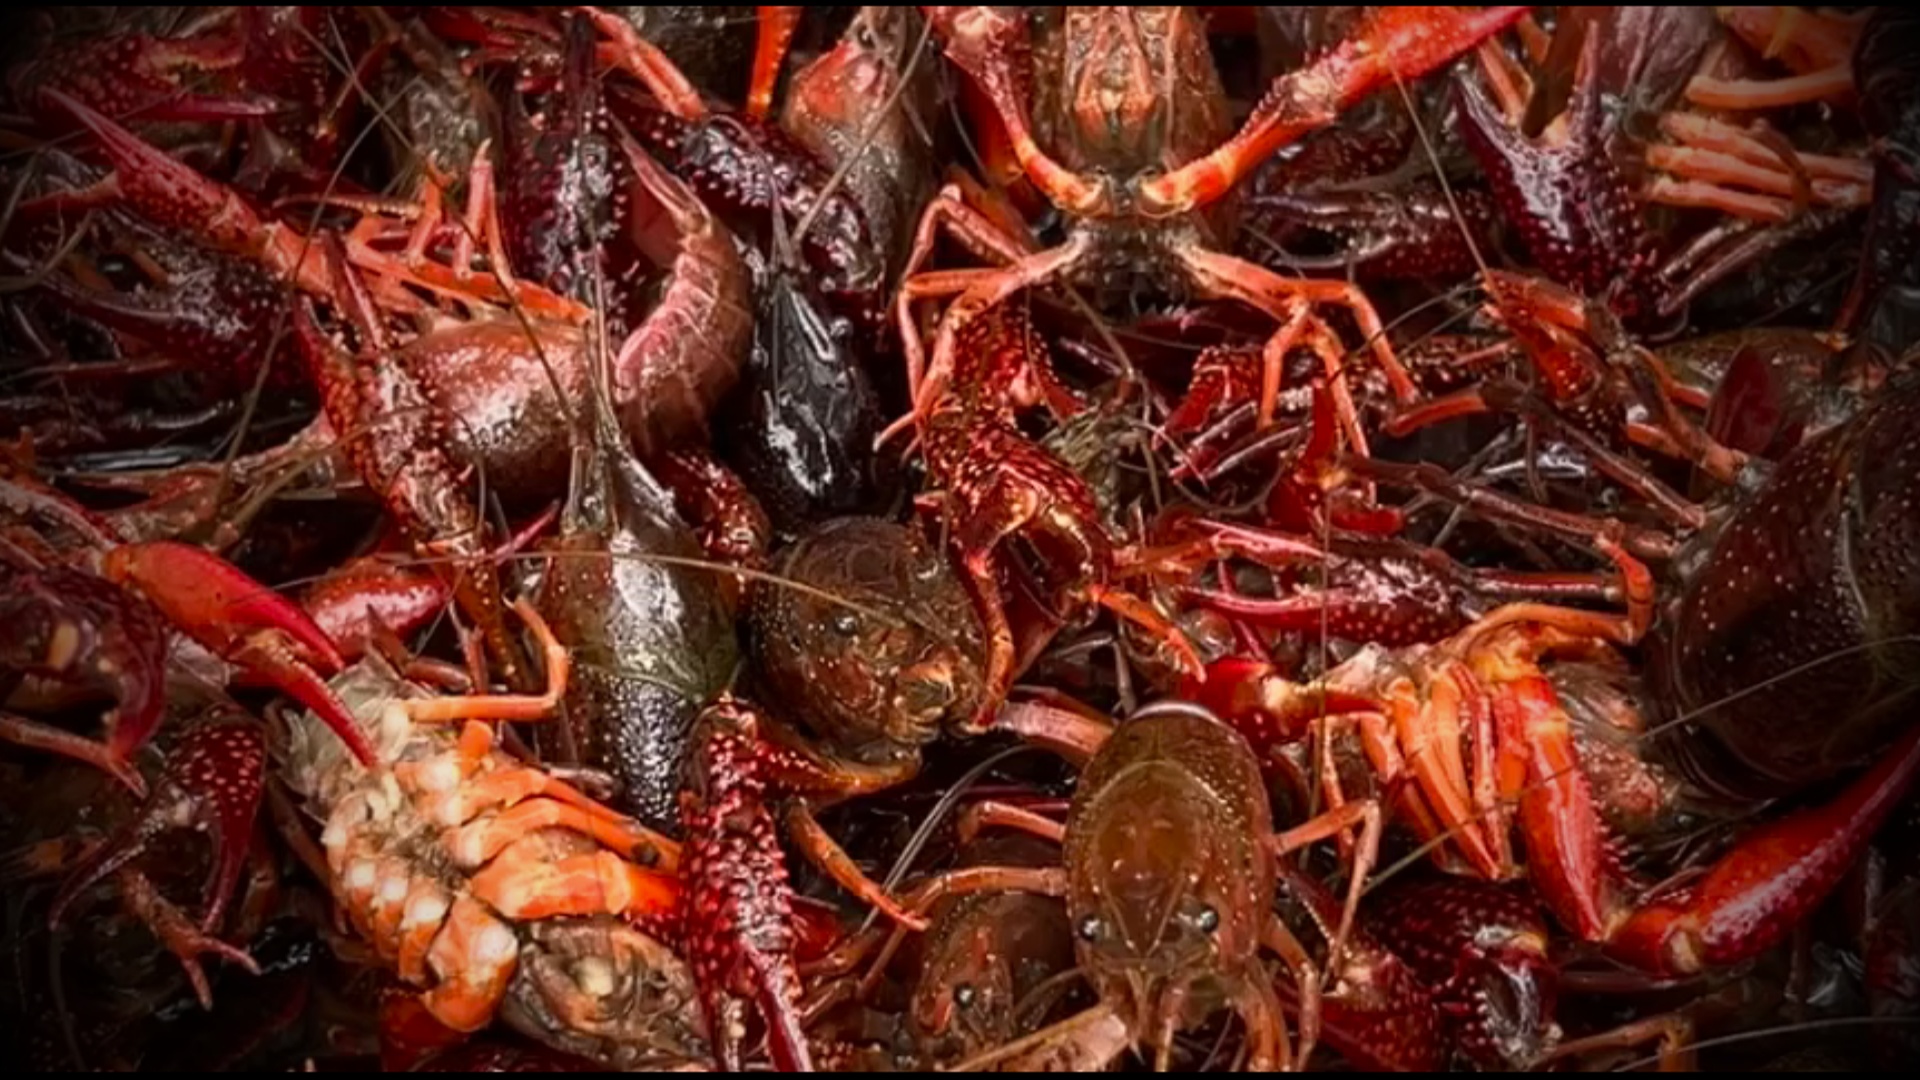 Worst season ever;' Experts predict historically bad crawfish harvest to  drive prices up